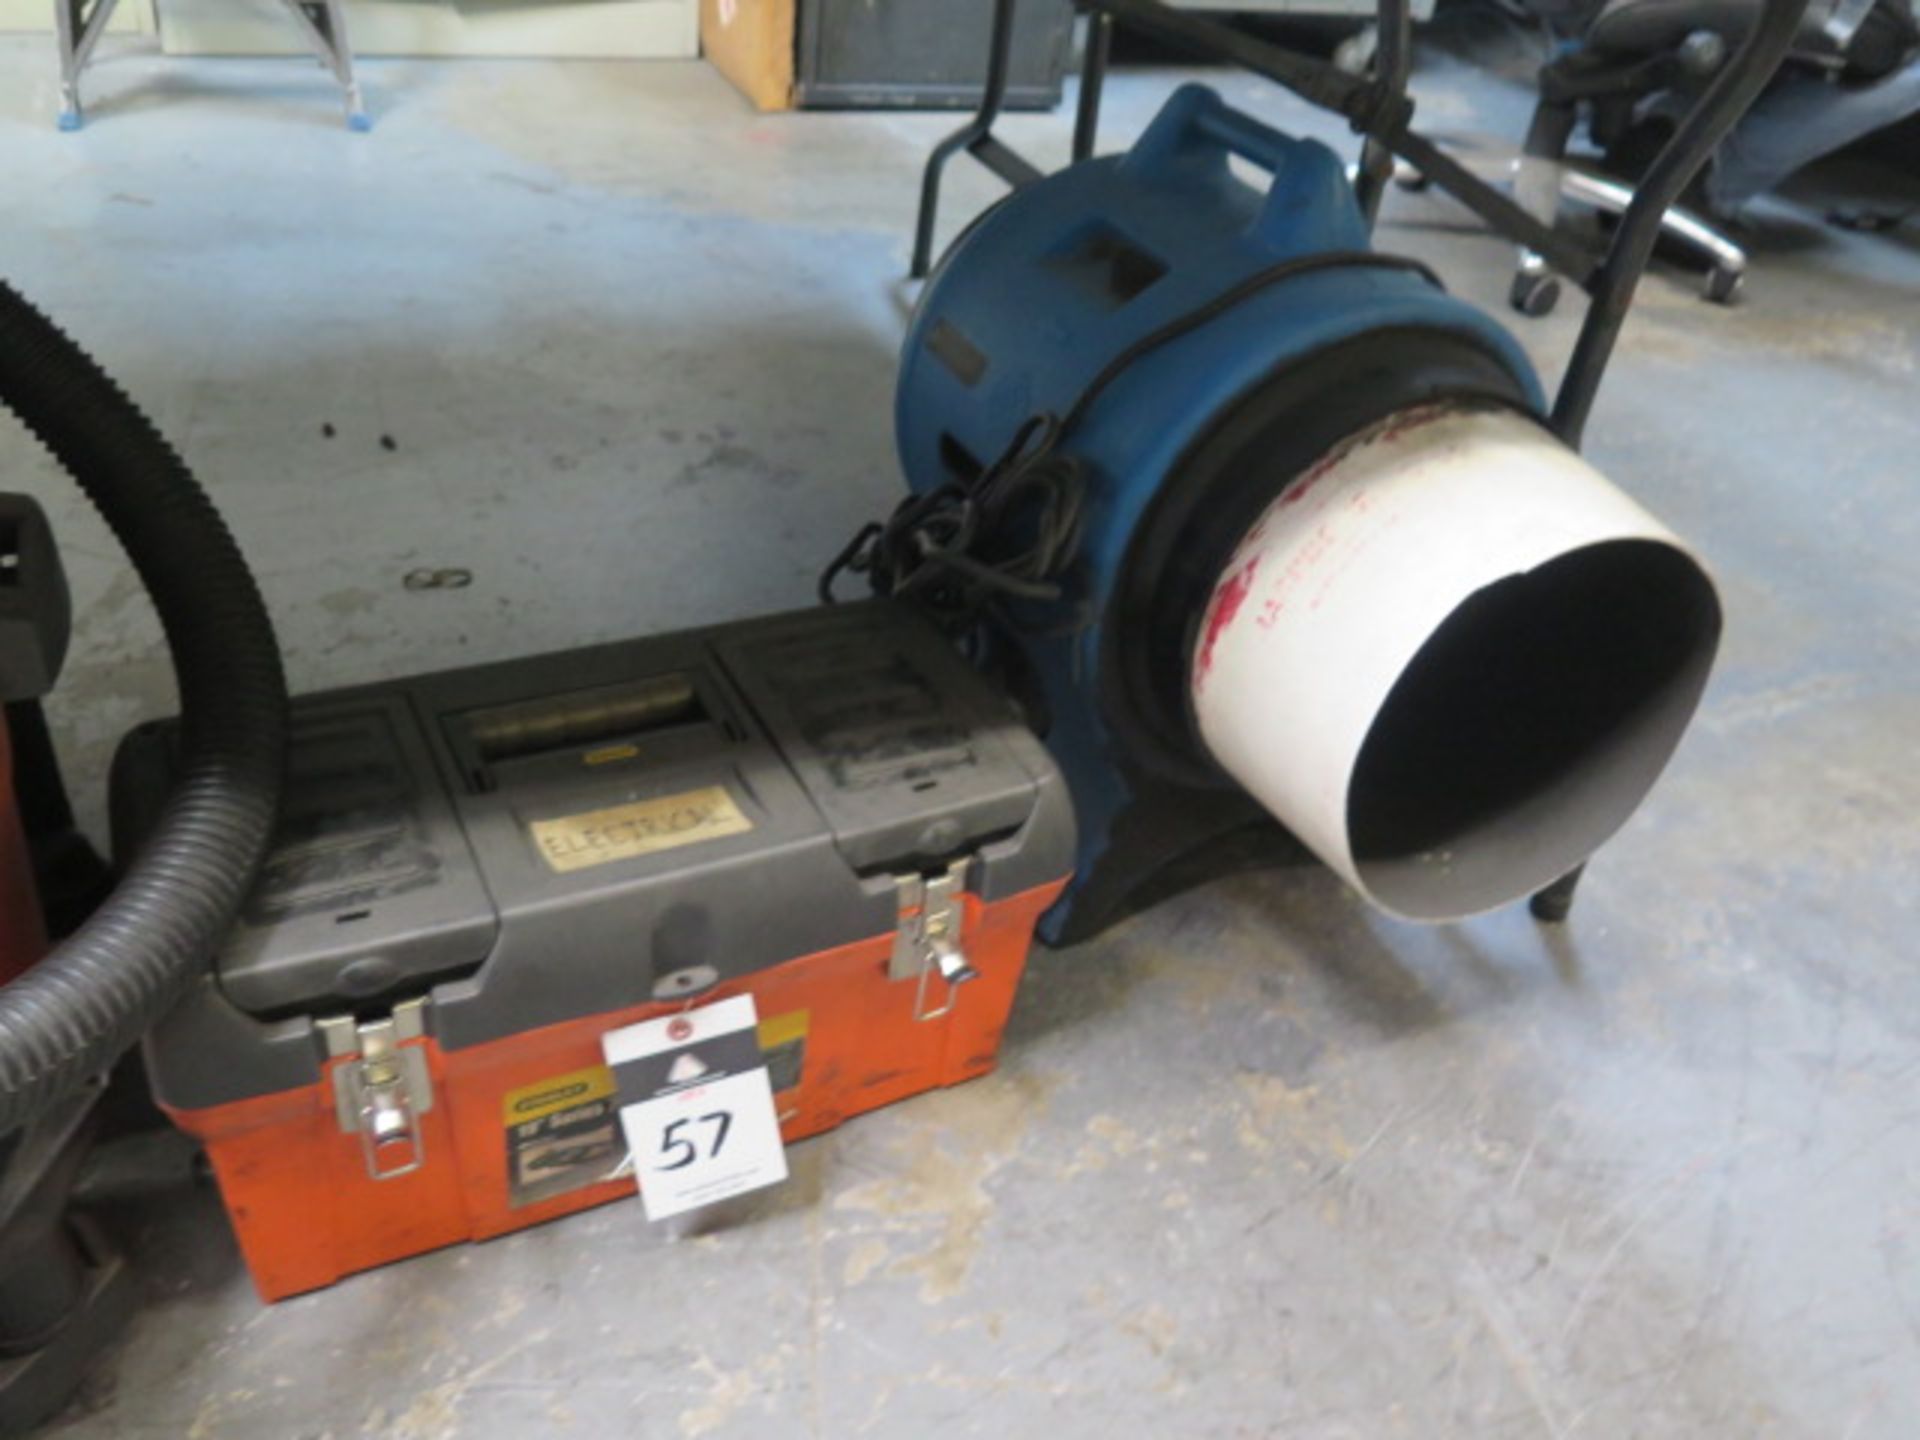 Misc Electrical Supplies and Blower